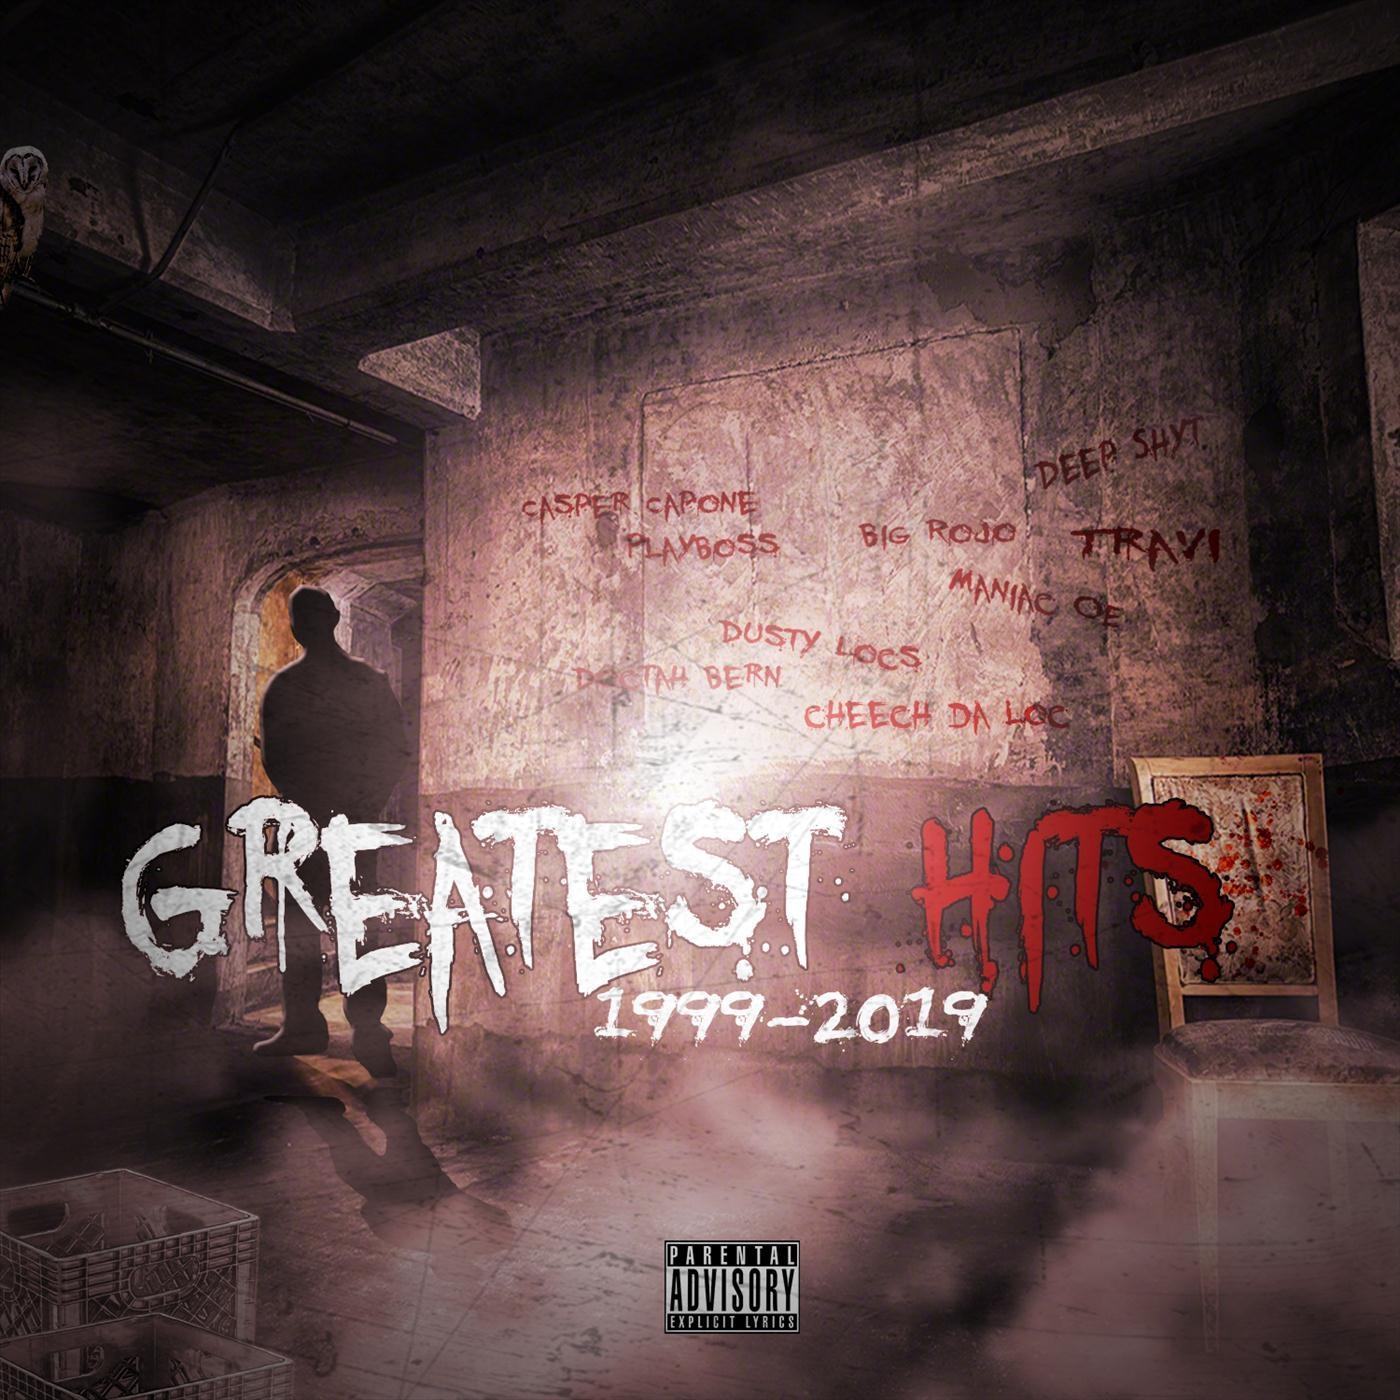 Greatest Hits (1999 - 2019)